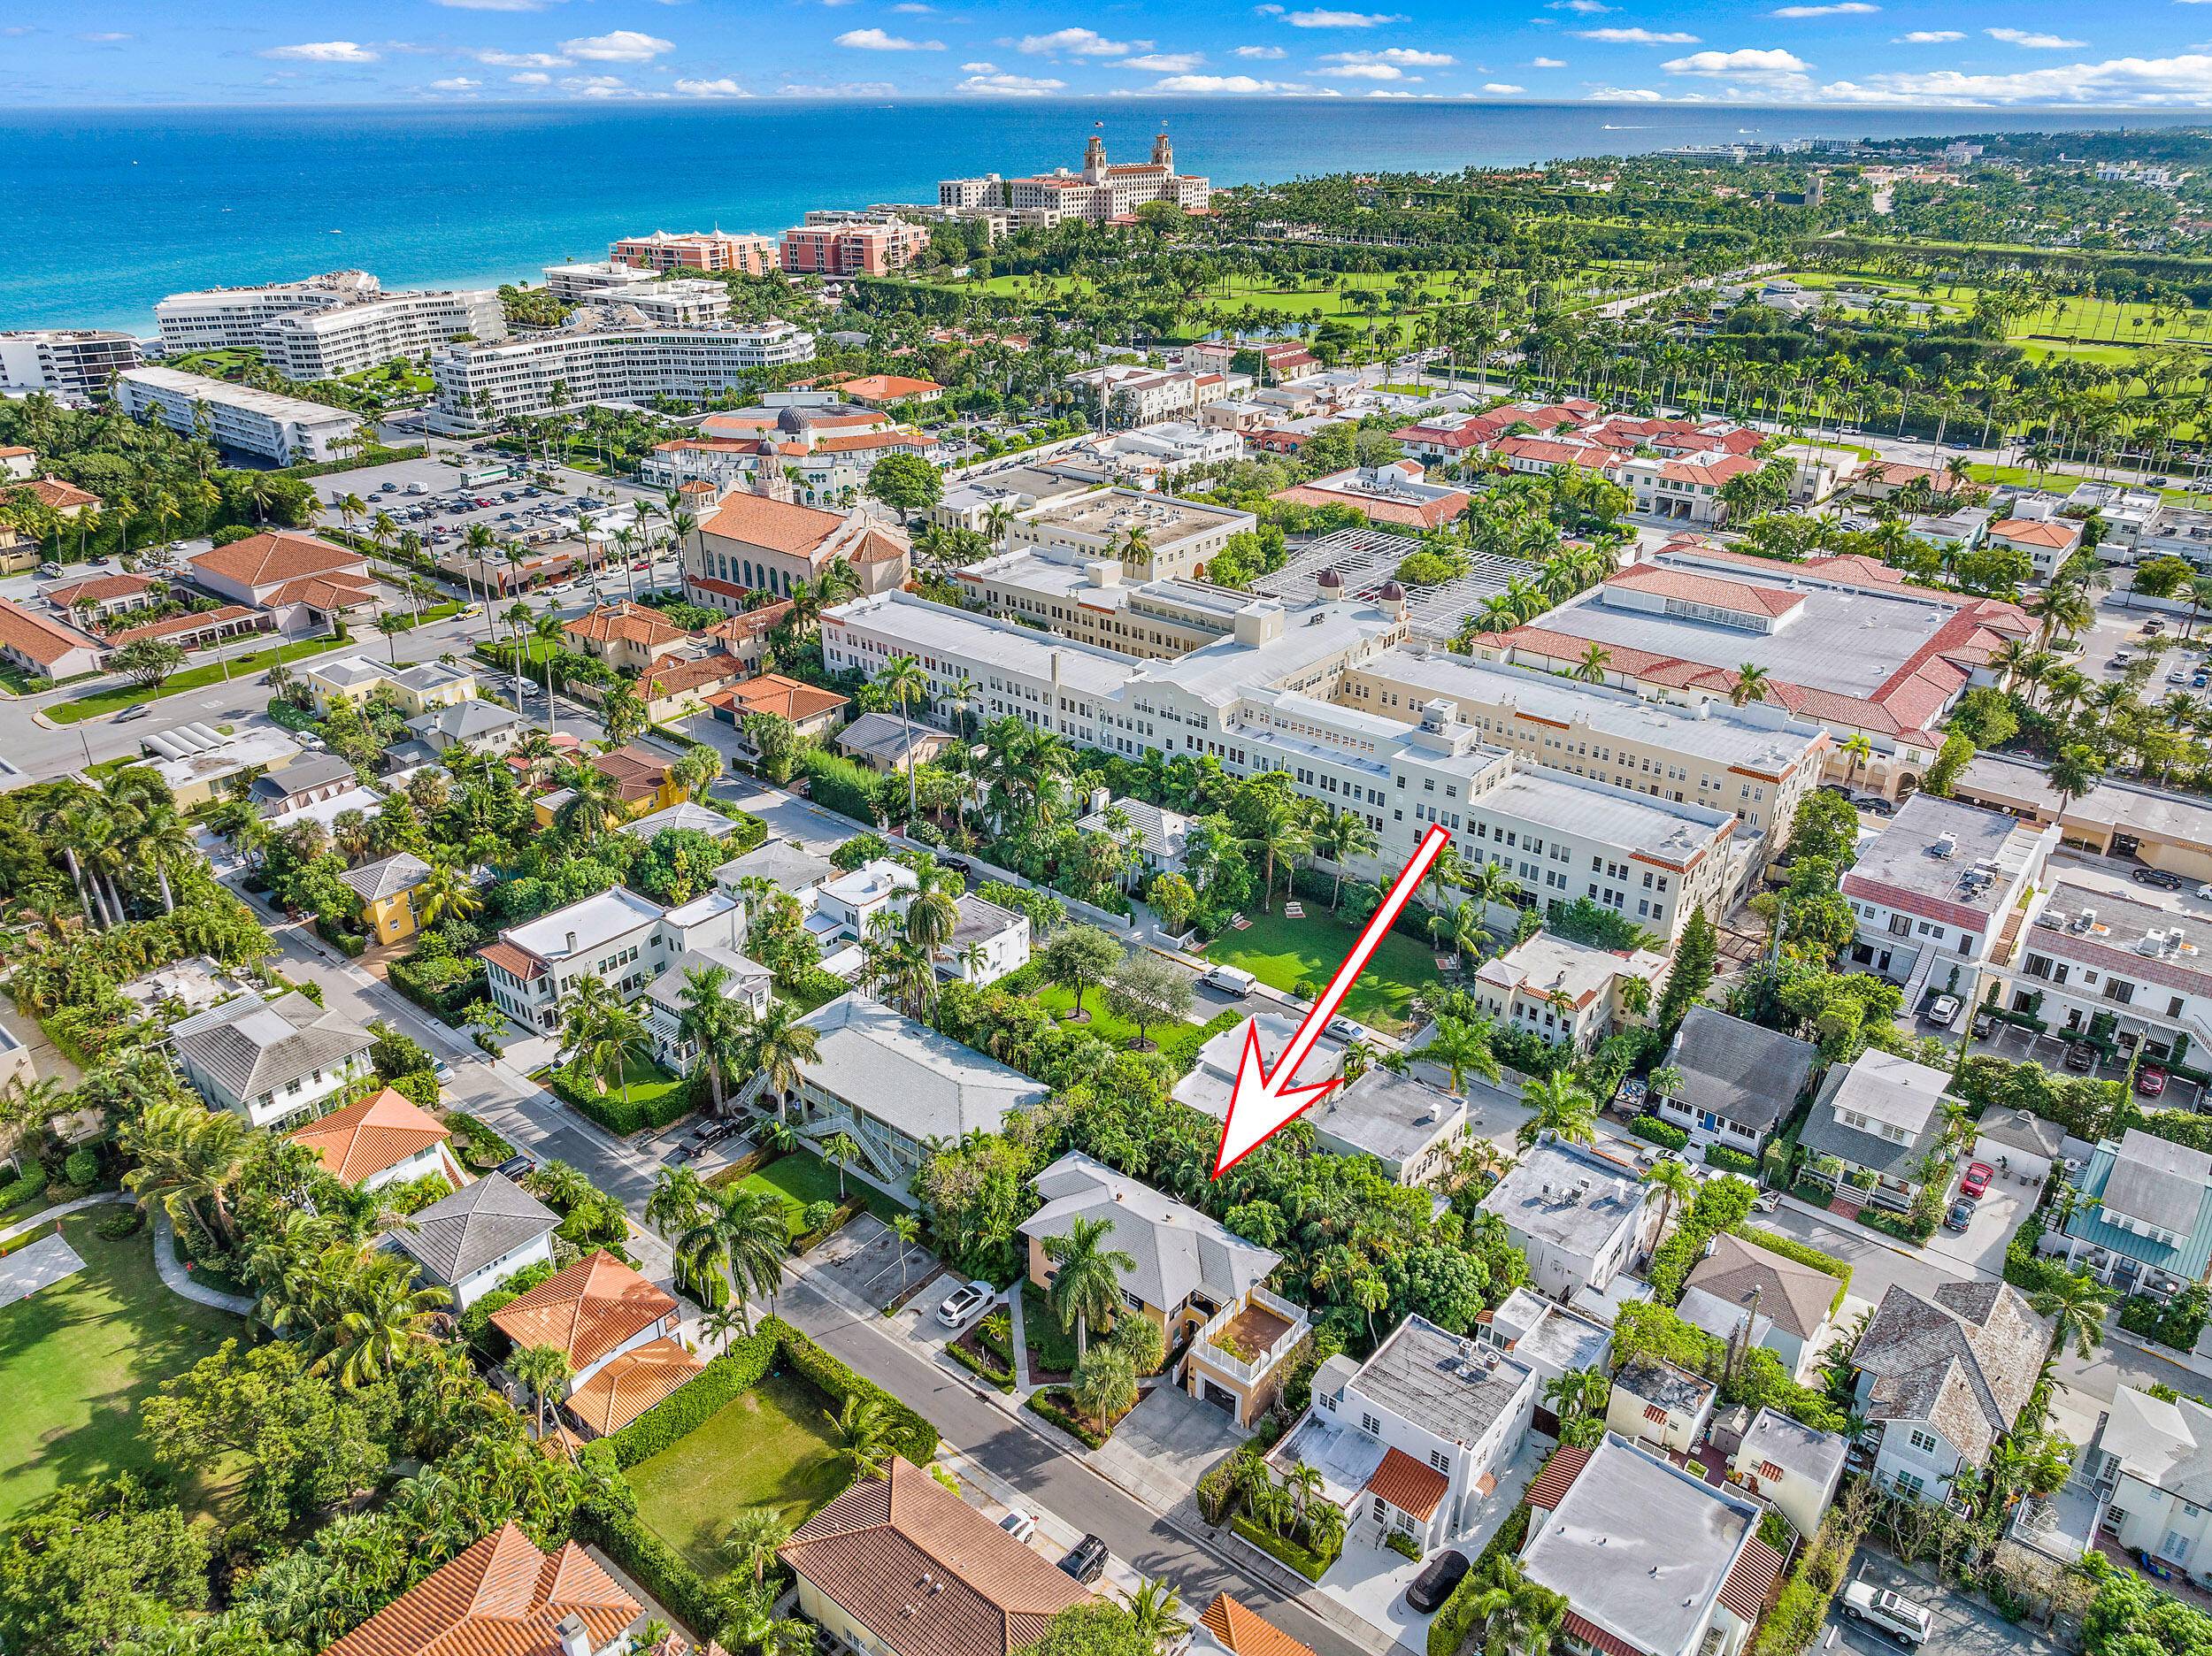 Rare Opportunity ! ! In the heart of Palm Beach Island this Triplex is situated on oversized lot with 5 off street parking spaces and Garage.